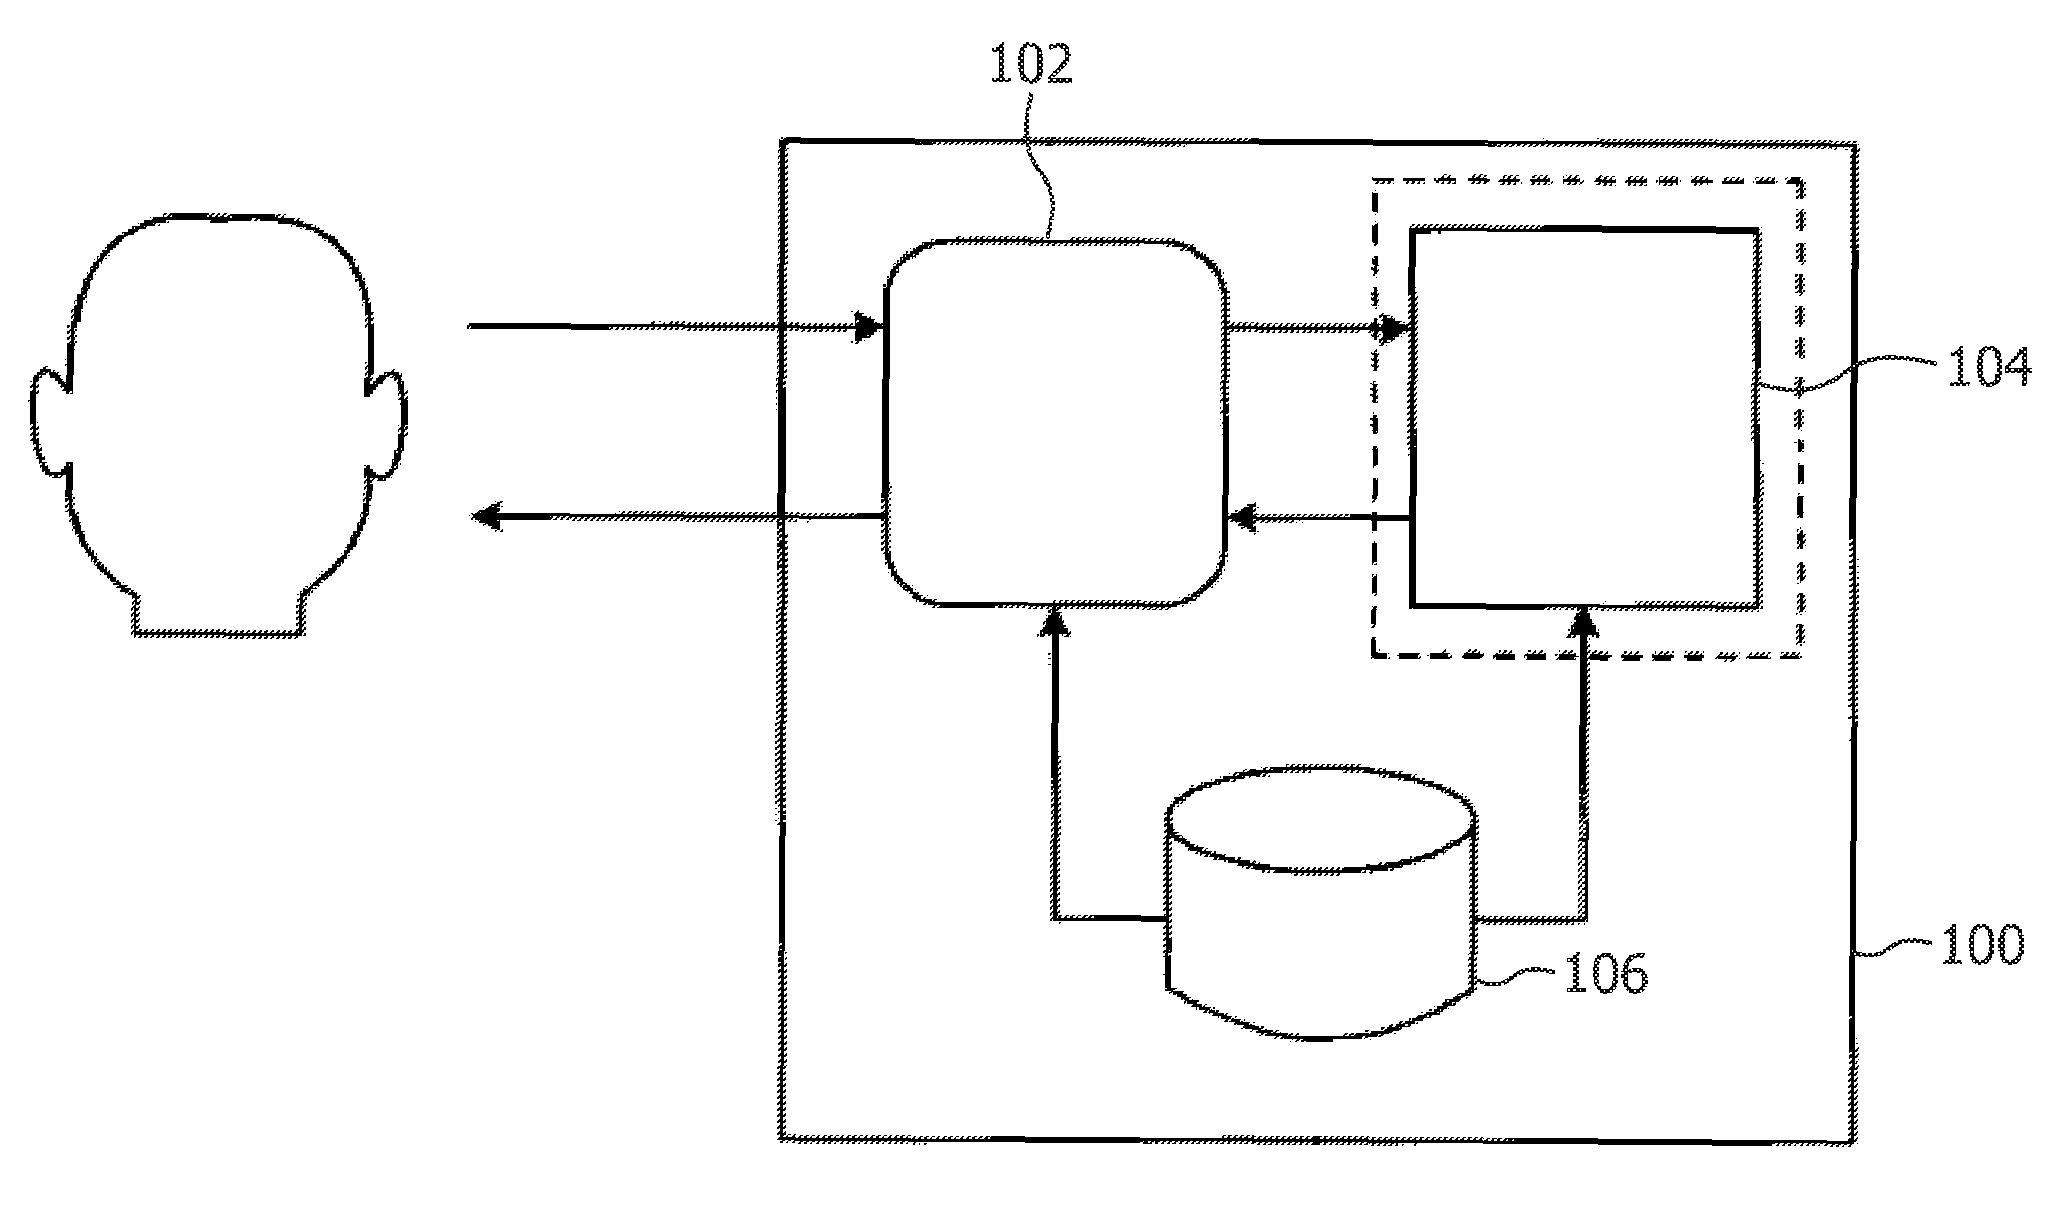 Method and Apparatus for Generation of a Sequence of Elements